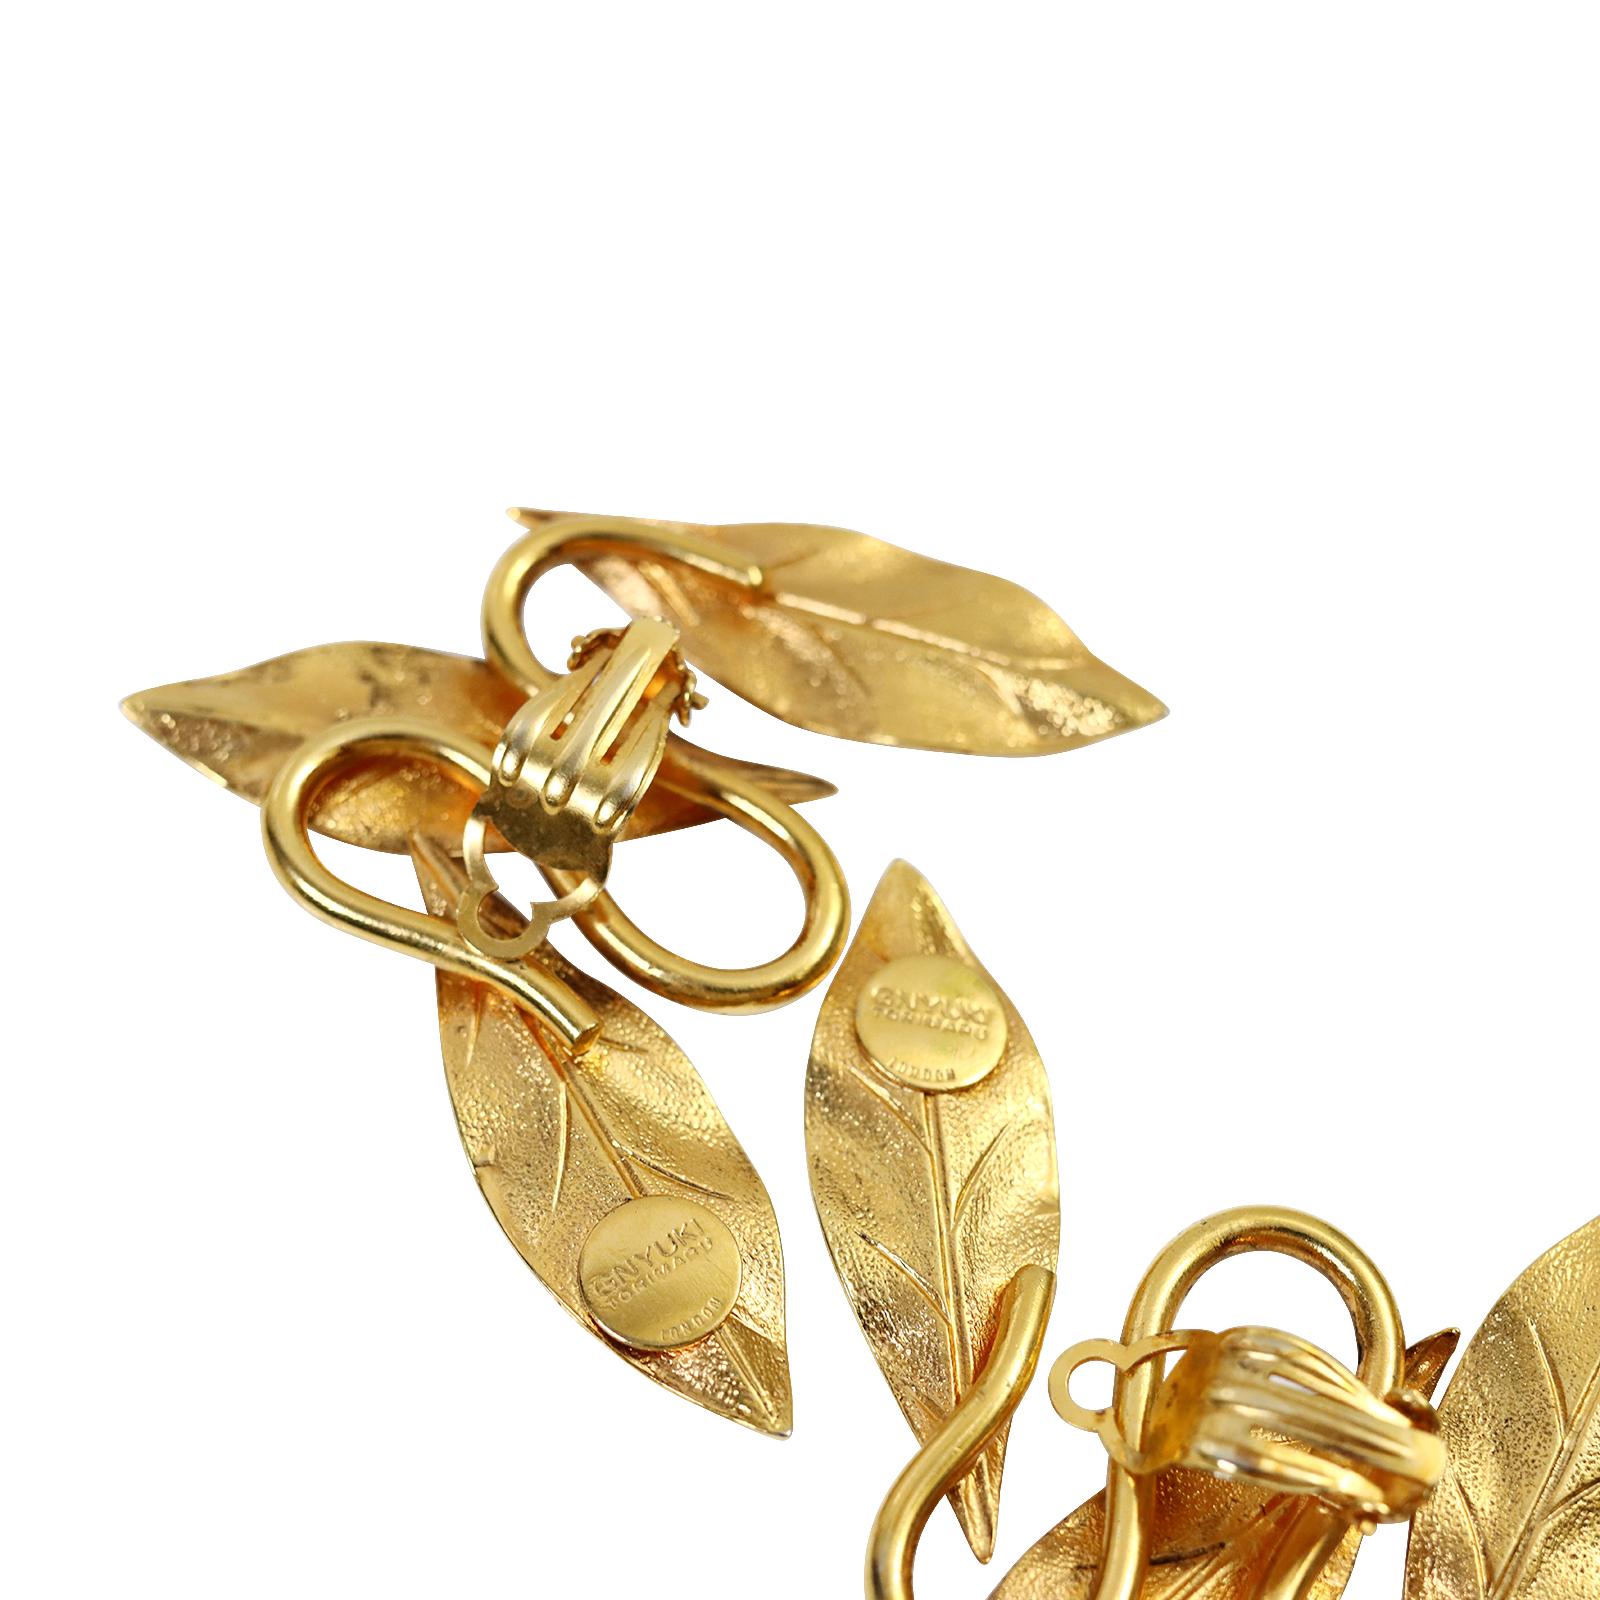 Vintage Gynuki Torimaru  Gold Tone Earrings Circa 1980s In Good Condition For Sale In New York, NY